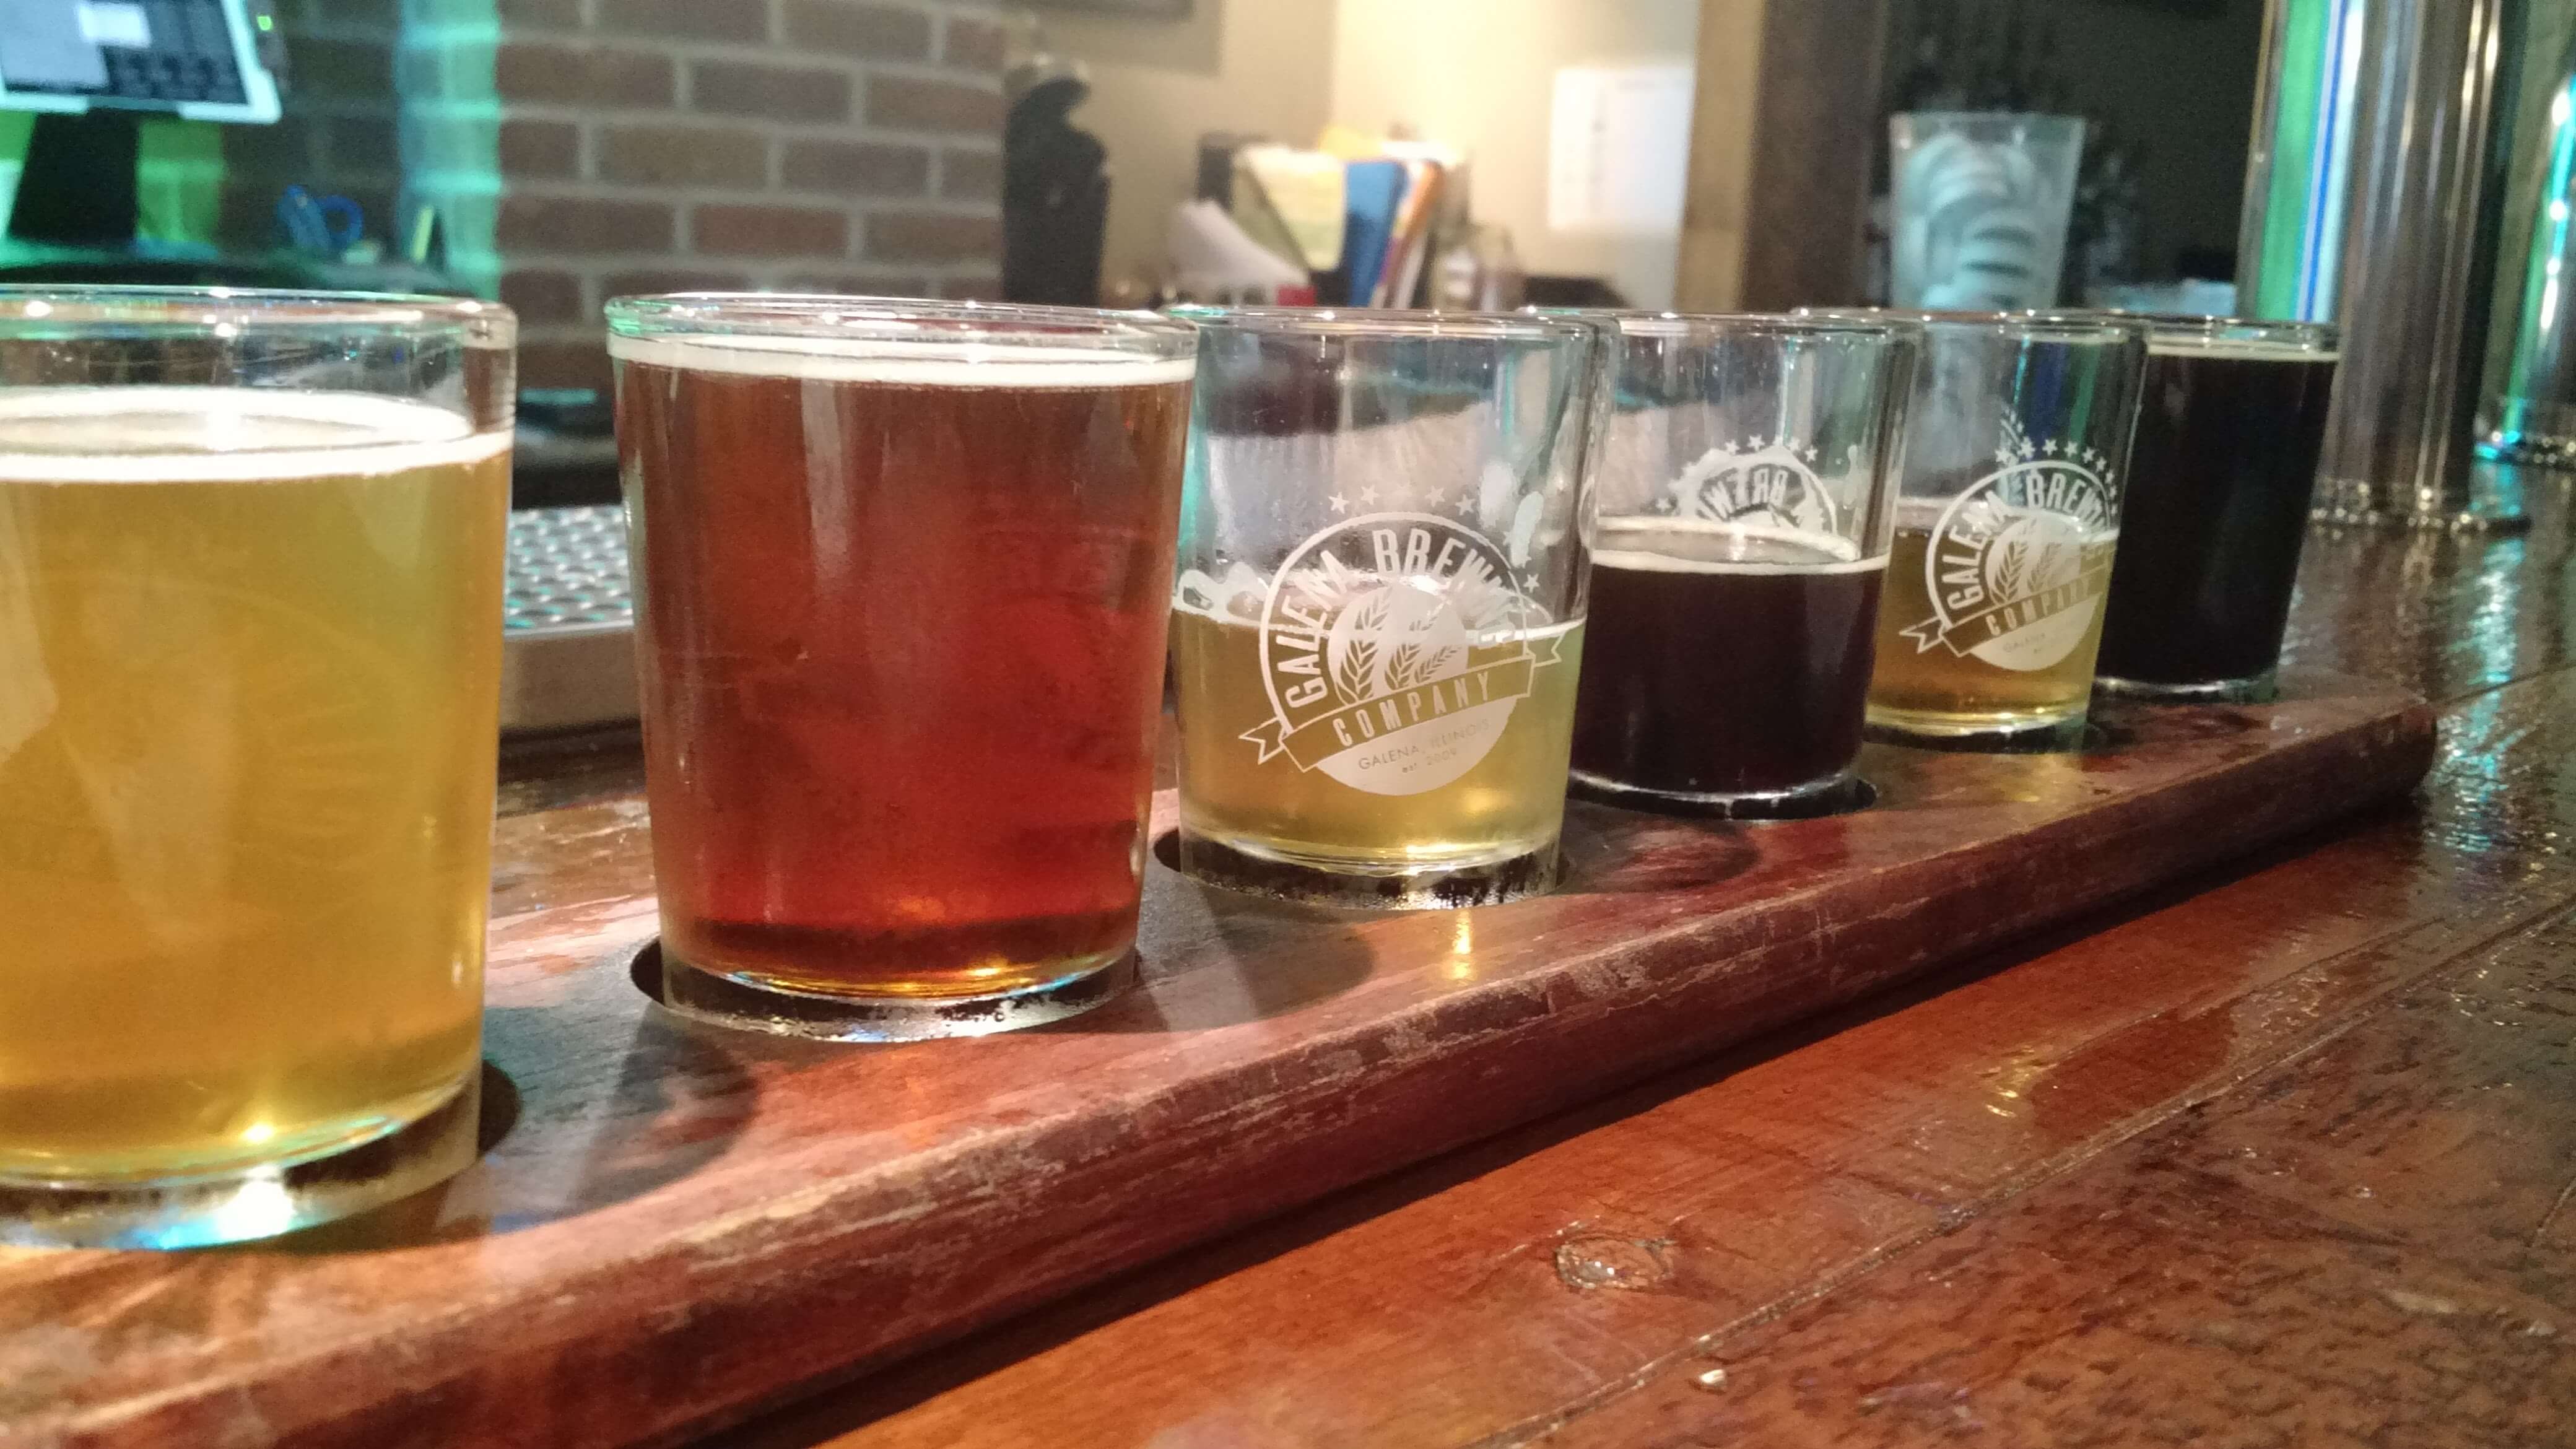 A generous flight of beers from Galena Brewing Company